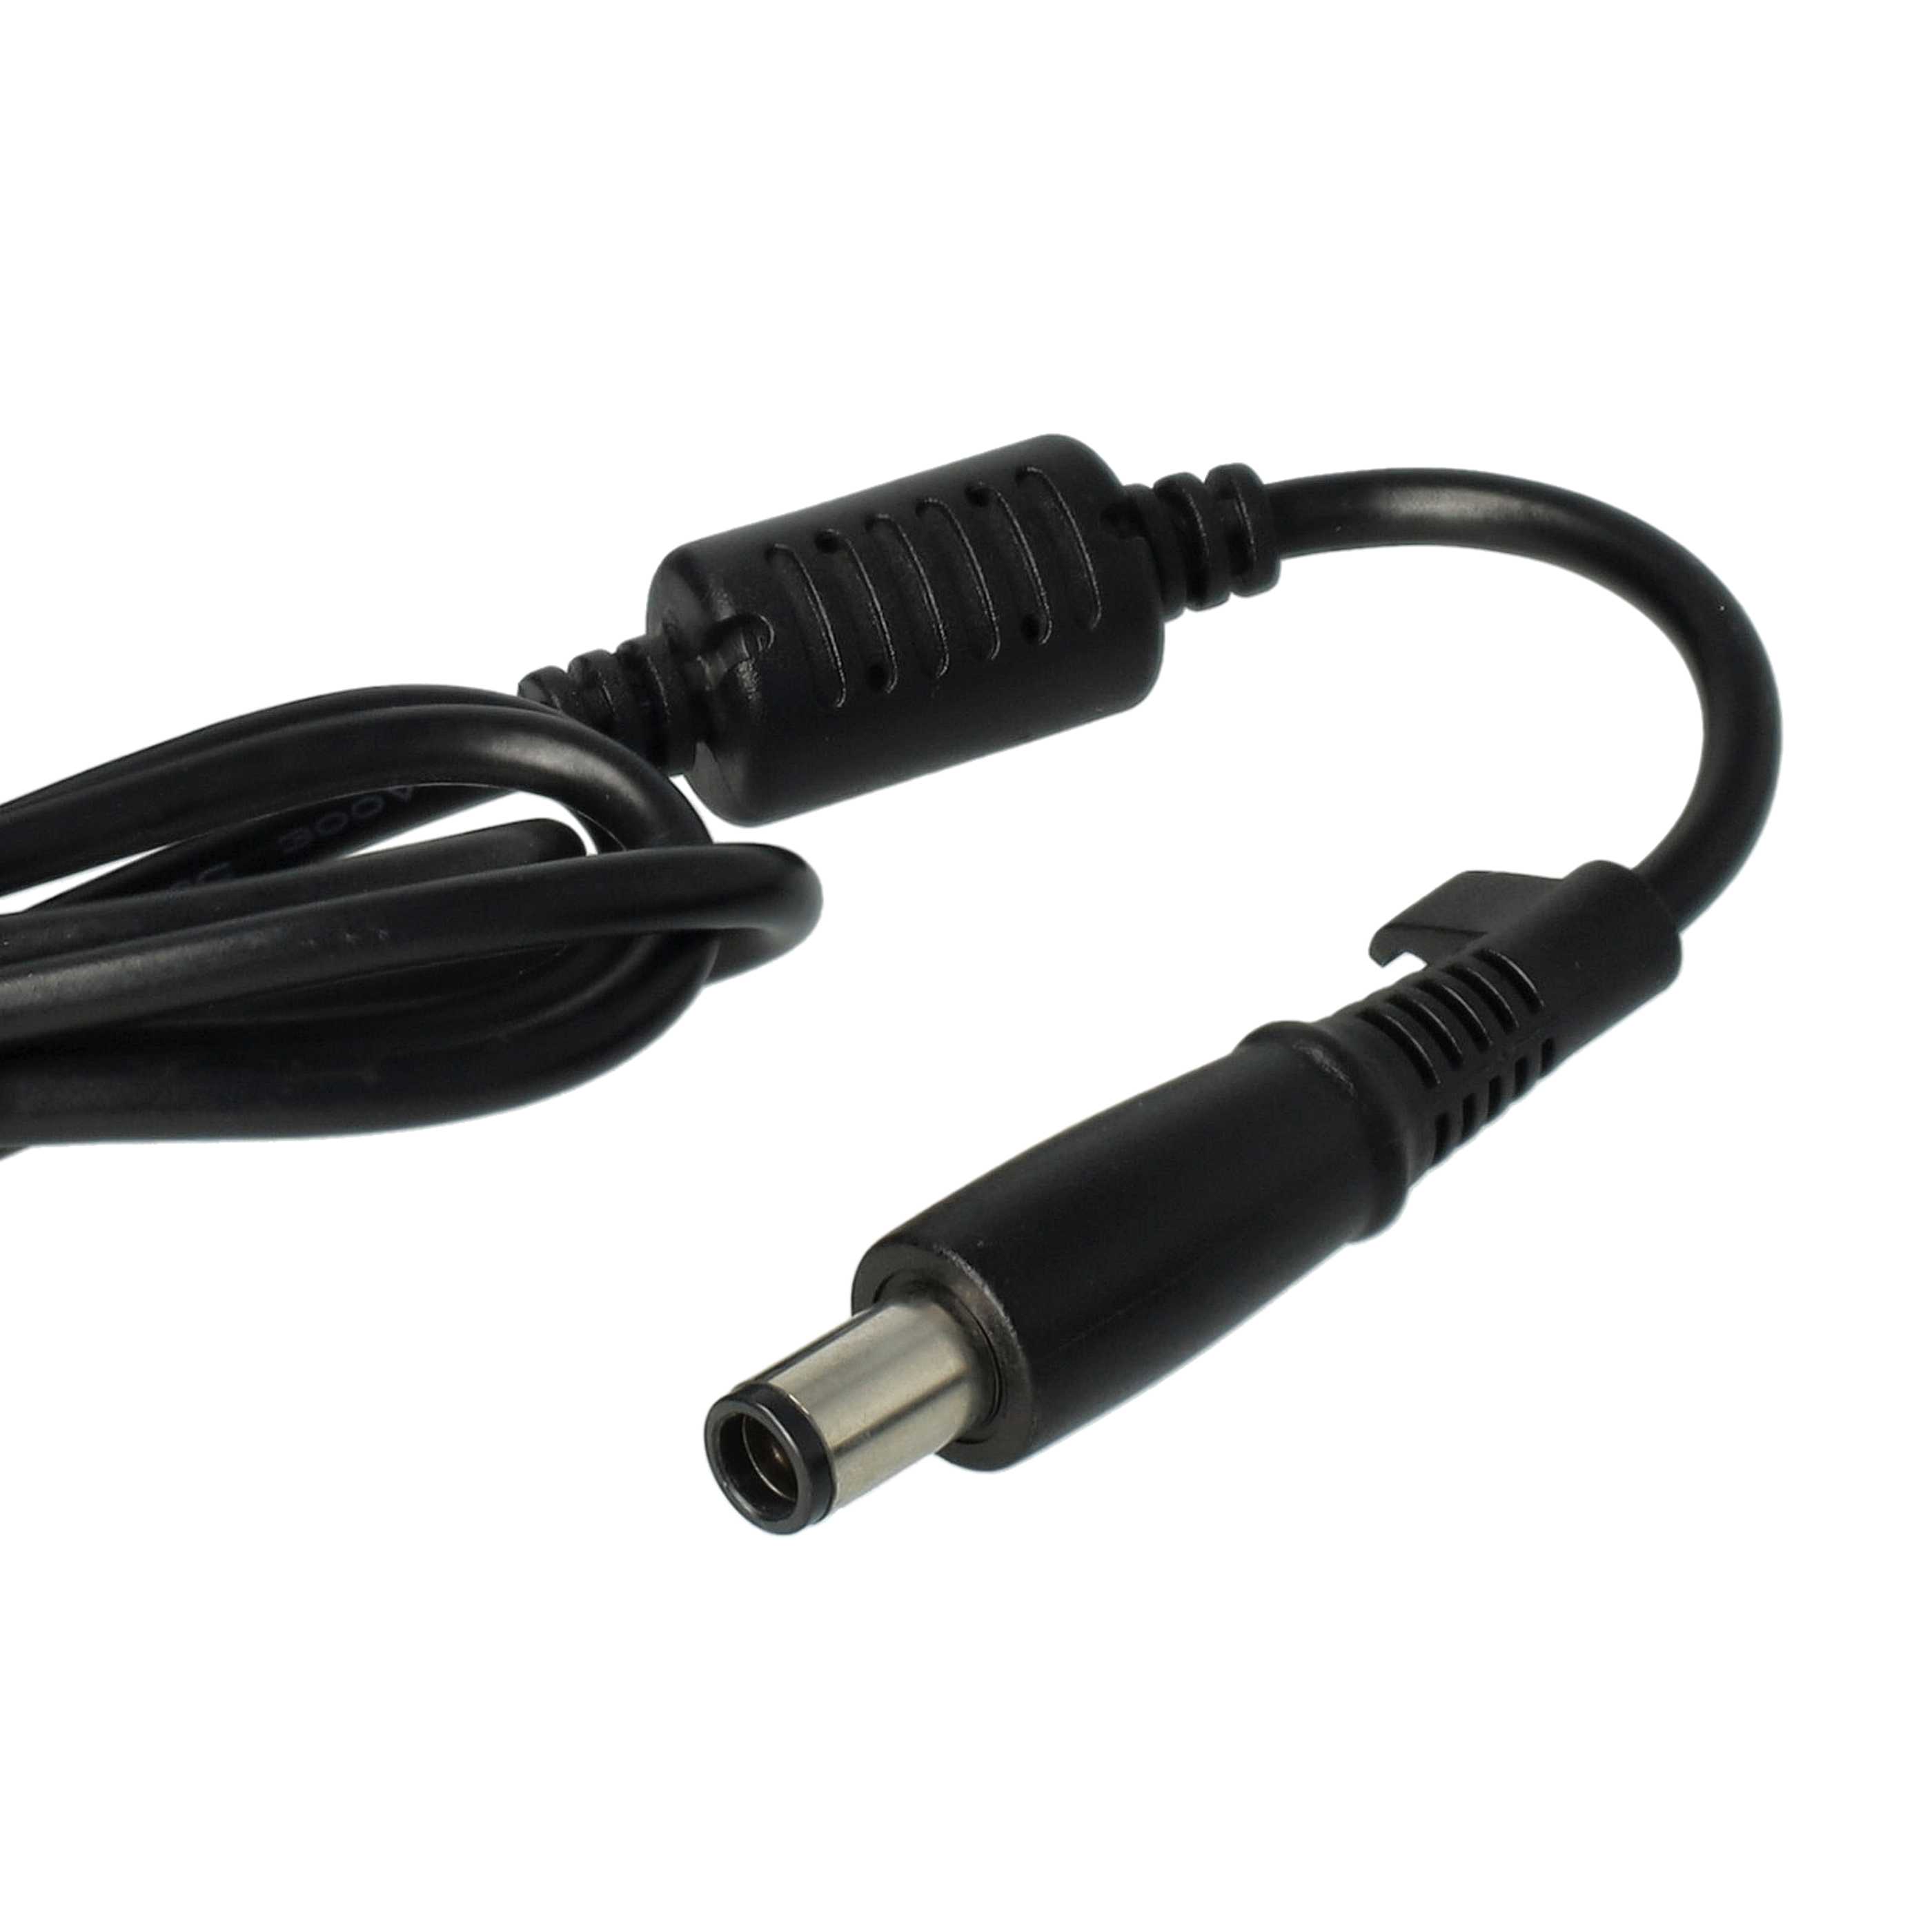 Cable carga coche reemplaza Dell 0RM805, 0F266, 310-2862, 0RM809, 09T215, 02H098 para notebook - 3.34 A